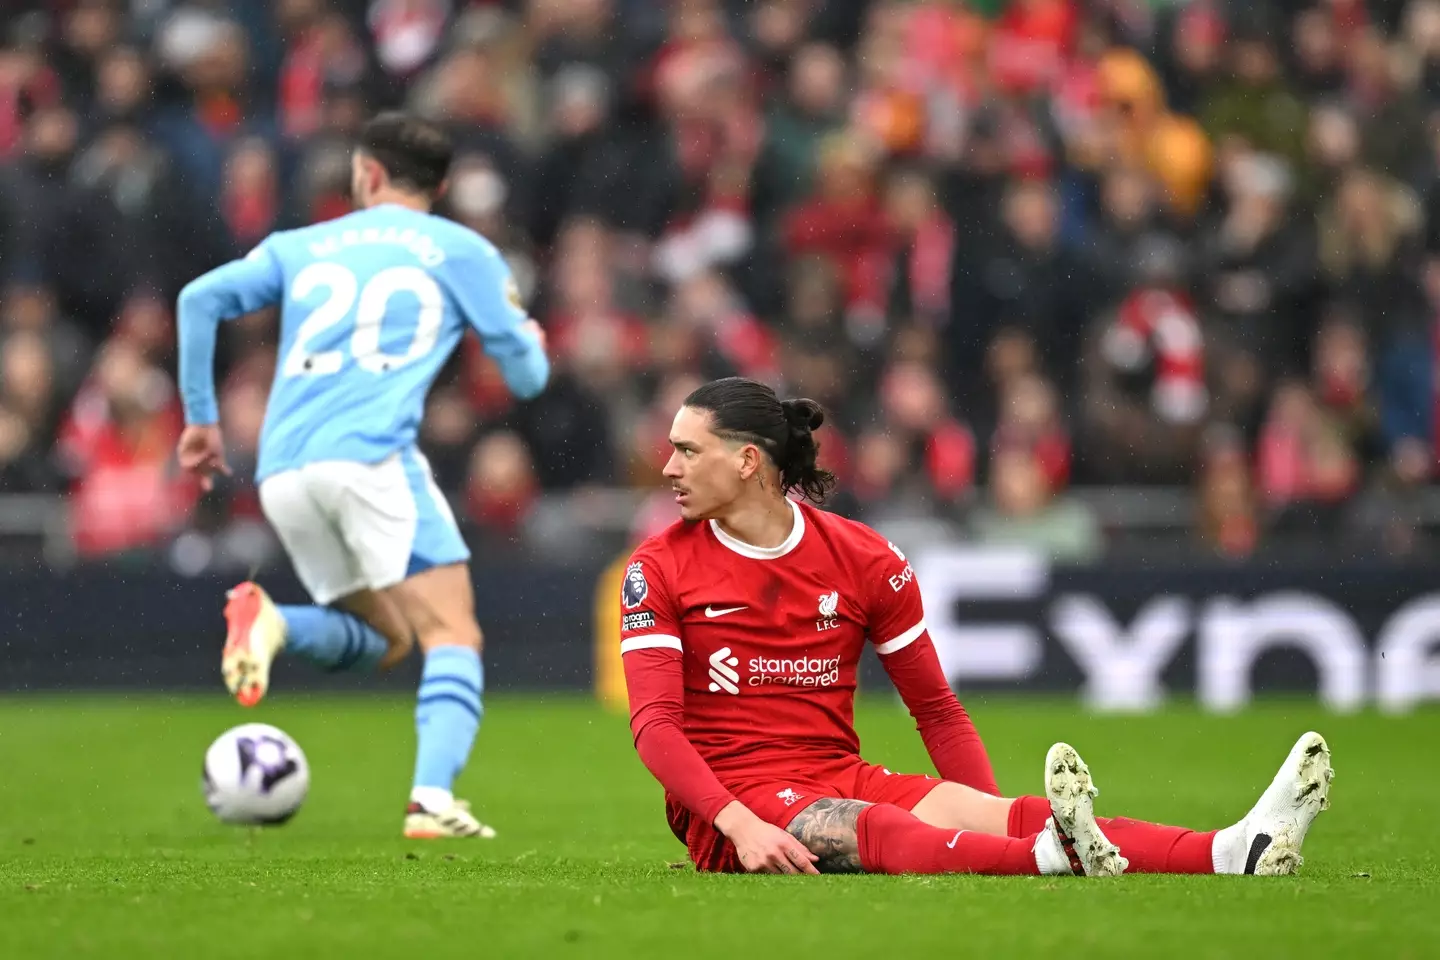 Darwin Nunez won a penalty for Liverpool in the draw against Man City. (